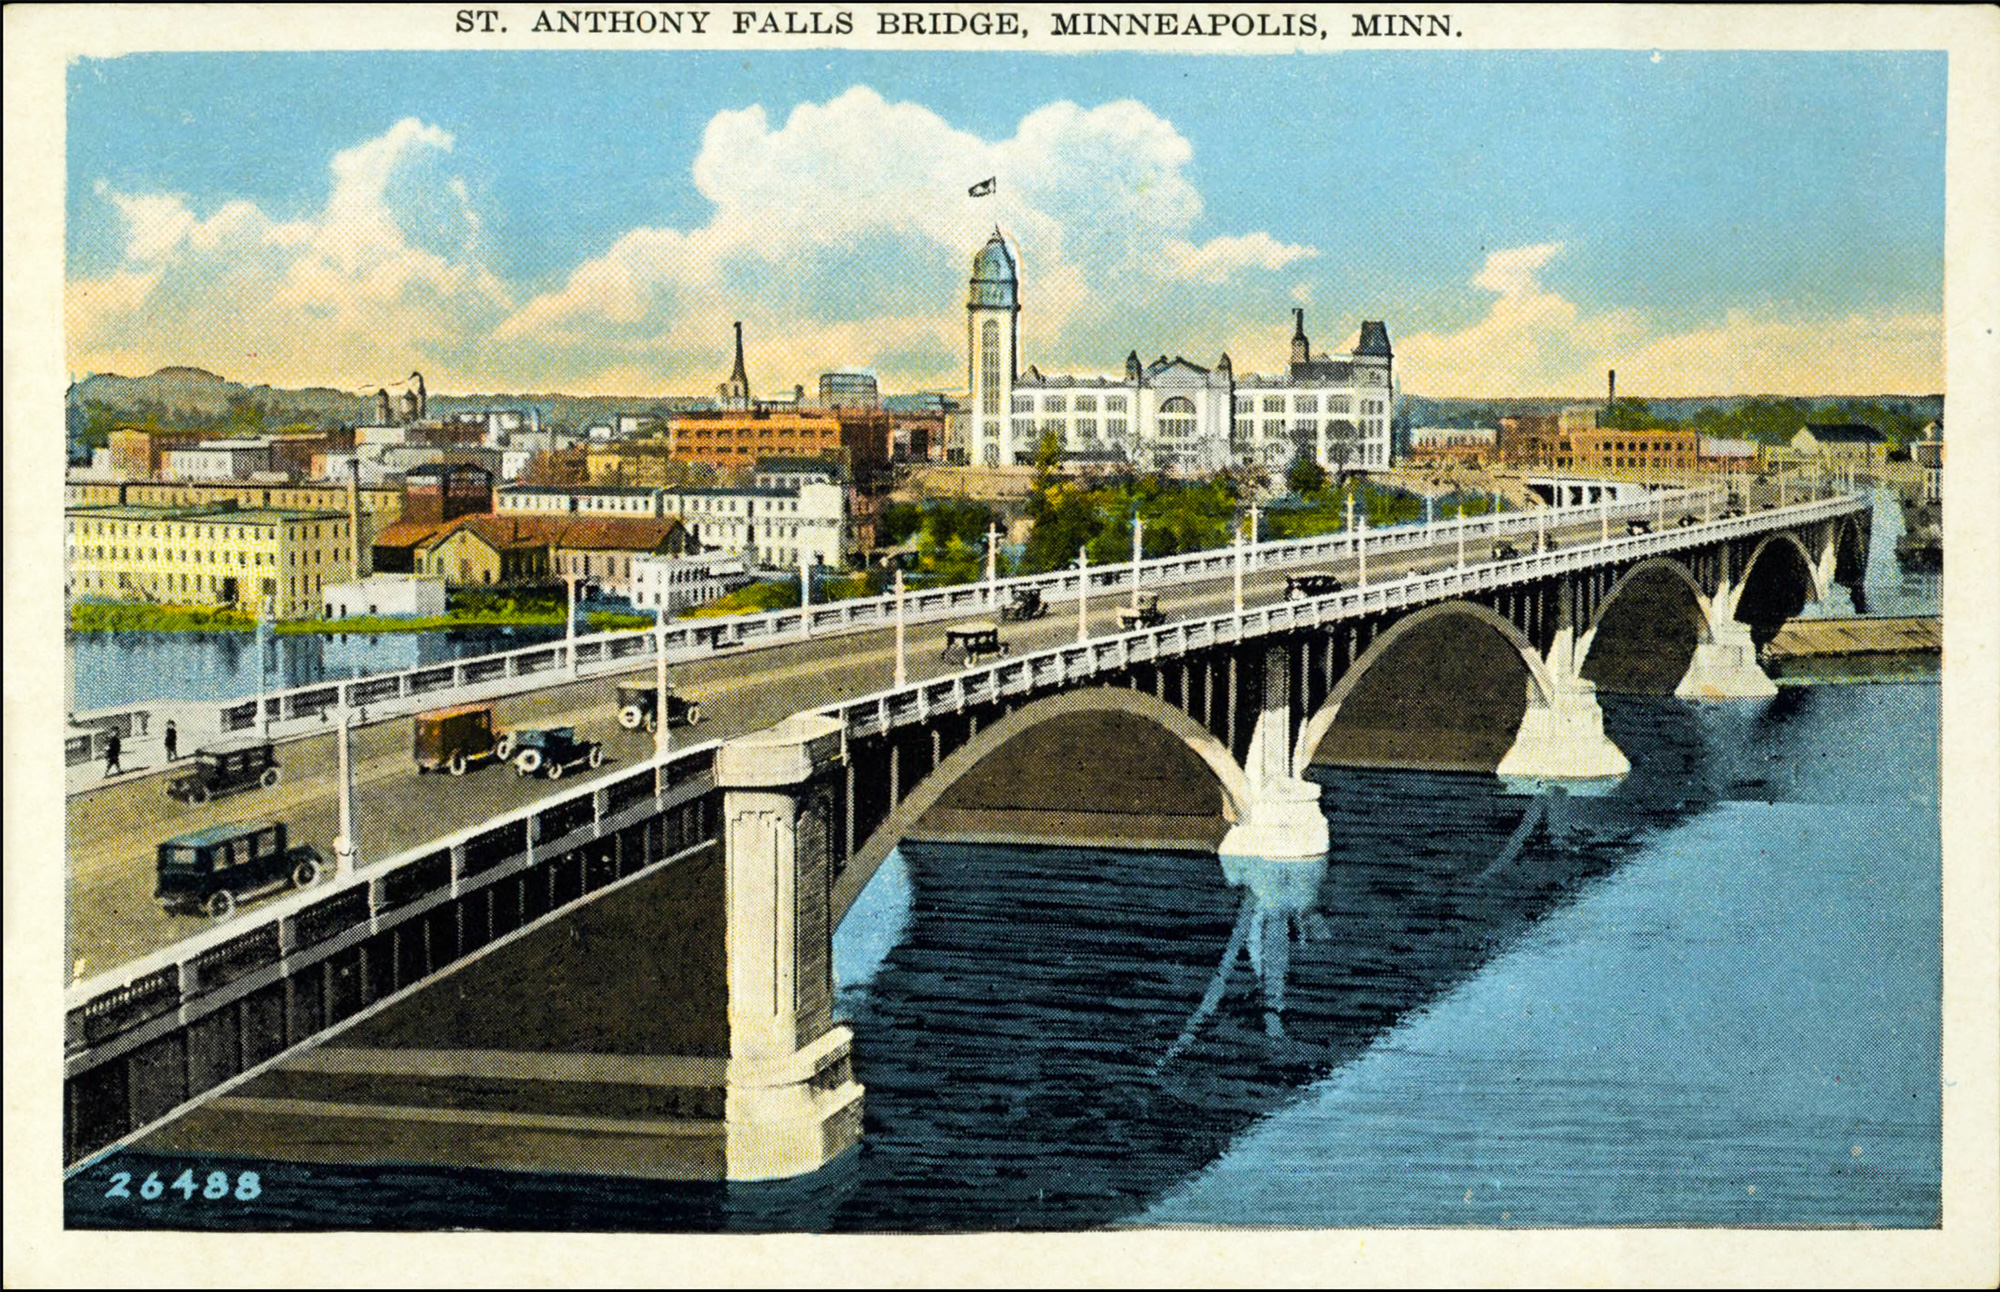 The bridge was designed with multiple overlooks from the bridge deck (one shown in foreground). Overlooks were a feature of the City Beautiful design aesthetic, encouraging visitors to stop and enjoy views of the river and city as they were passing through